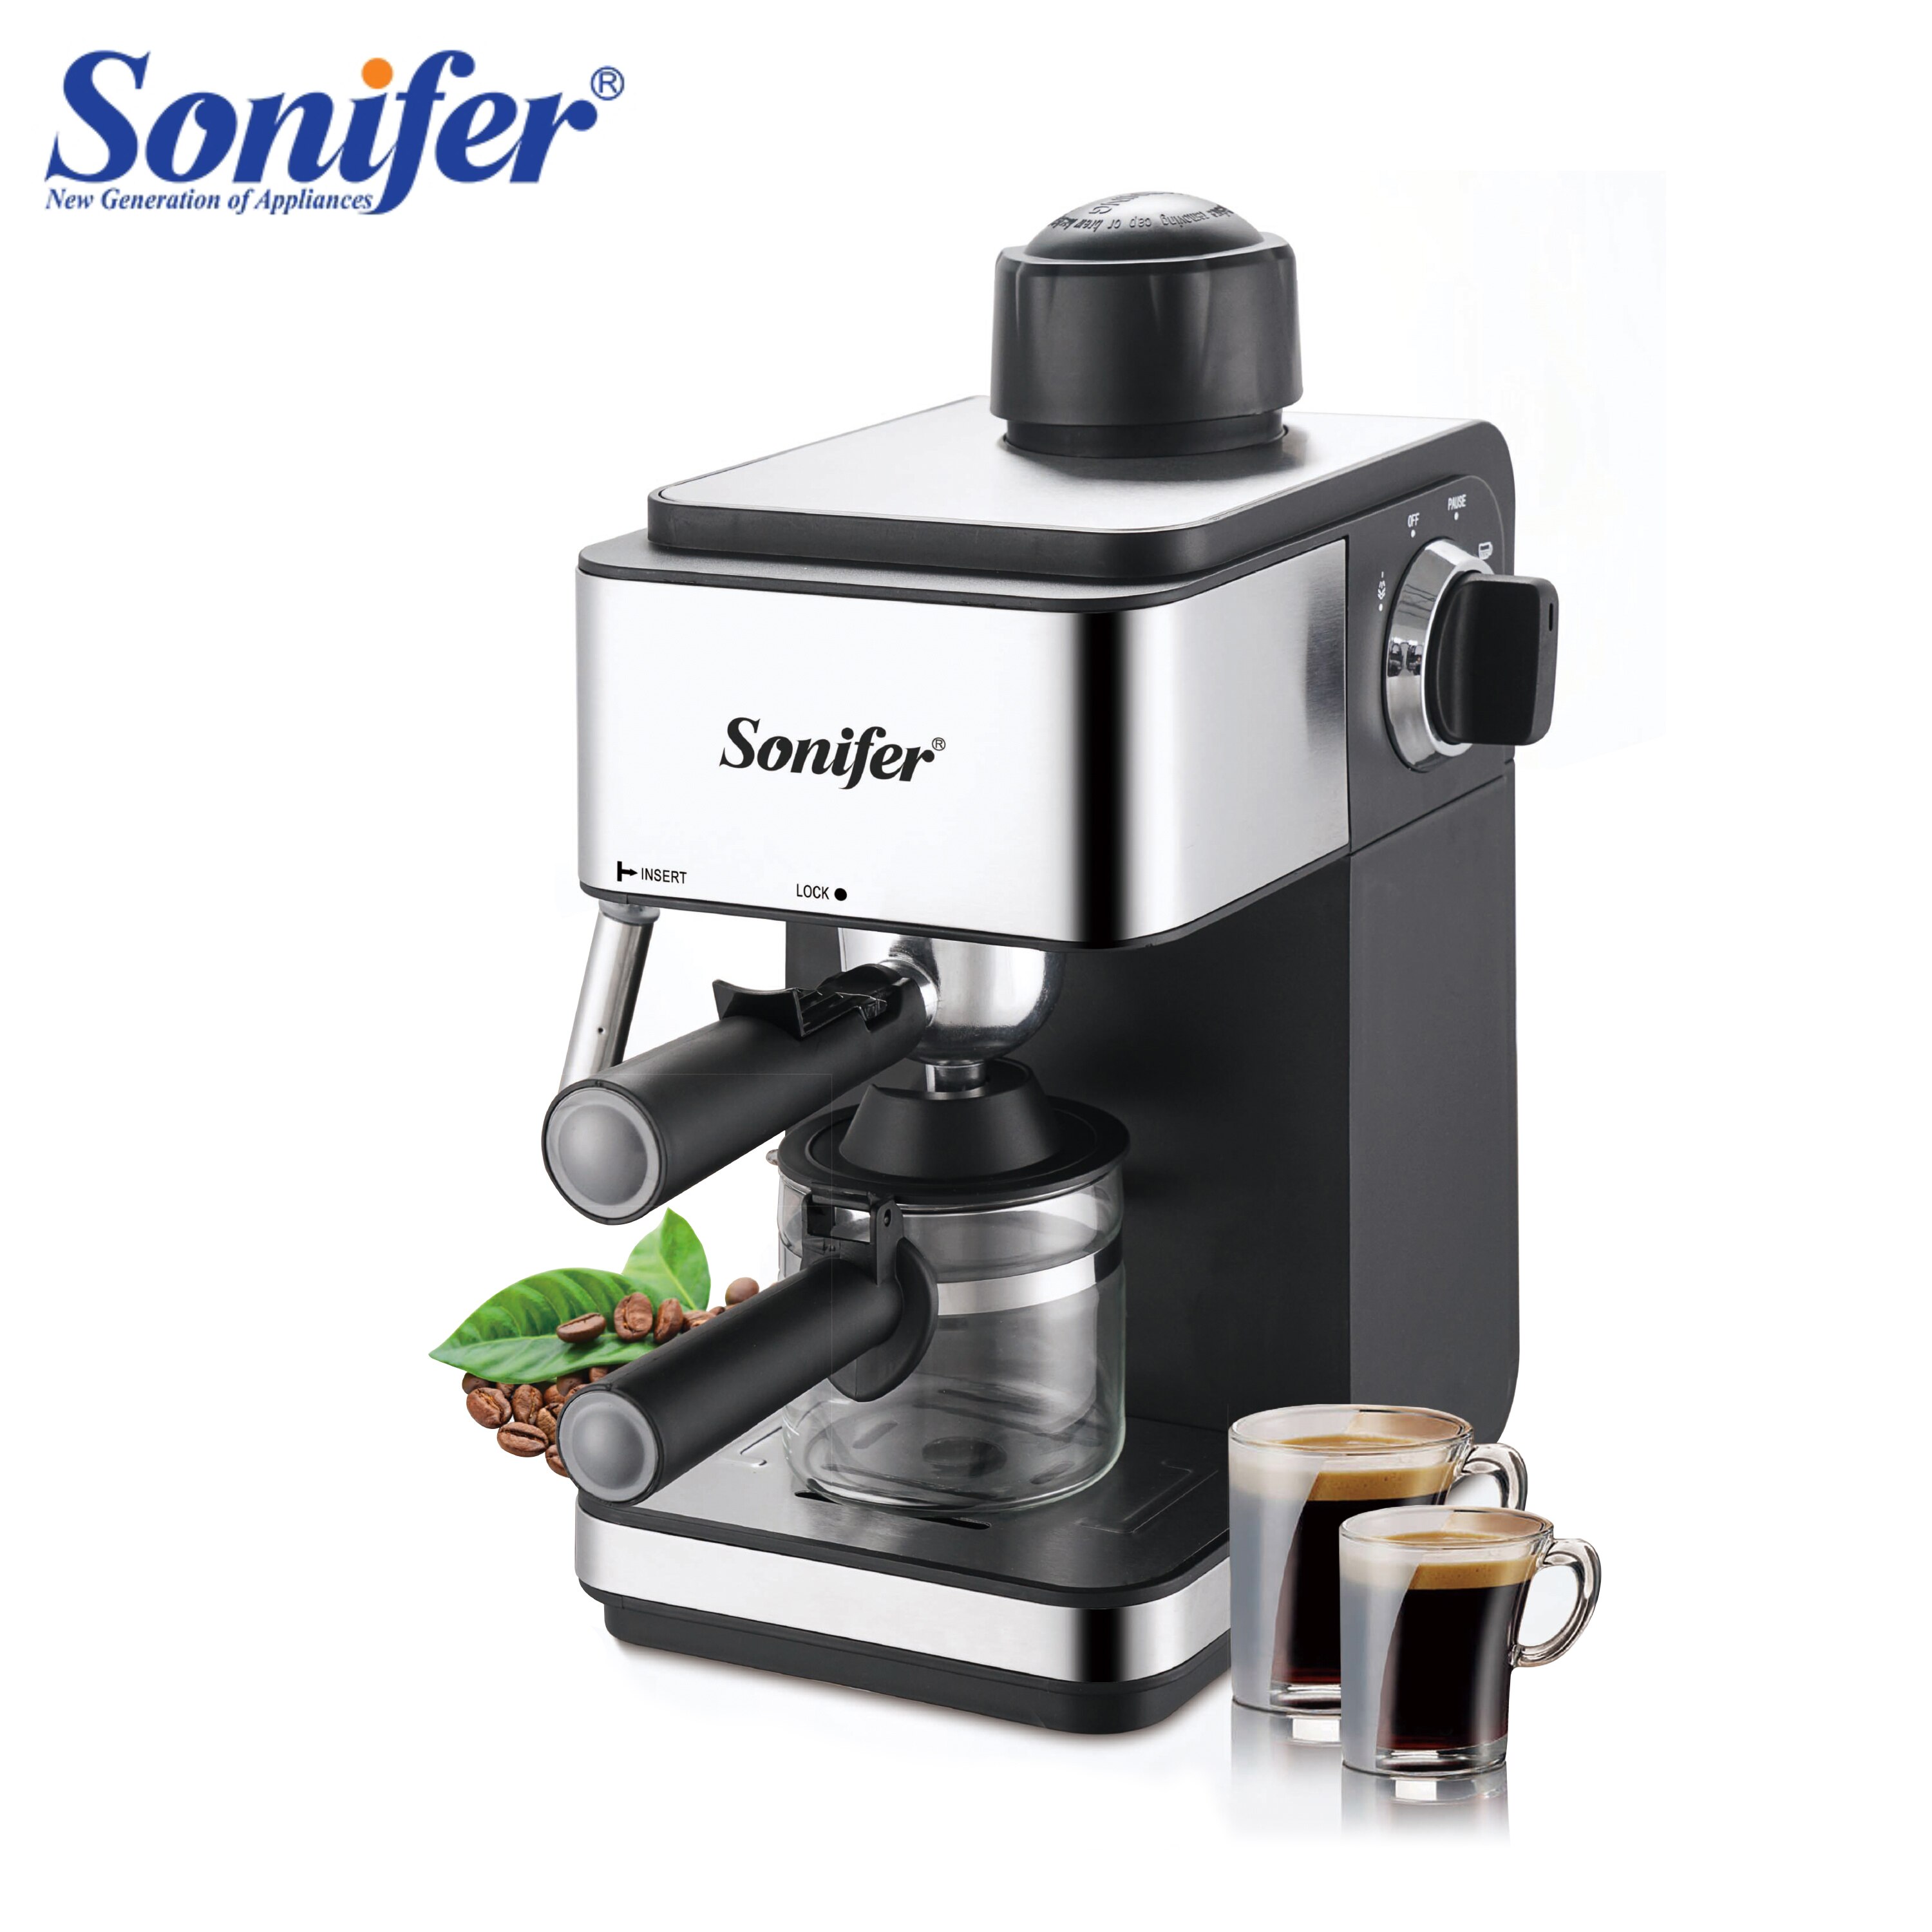 Italian Expresso Coffee Machine 15 Bar Dolce Milk Frother Home Appliances Express Electric Foam Cappuccino Coffee Maker Sonifer